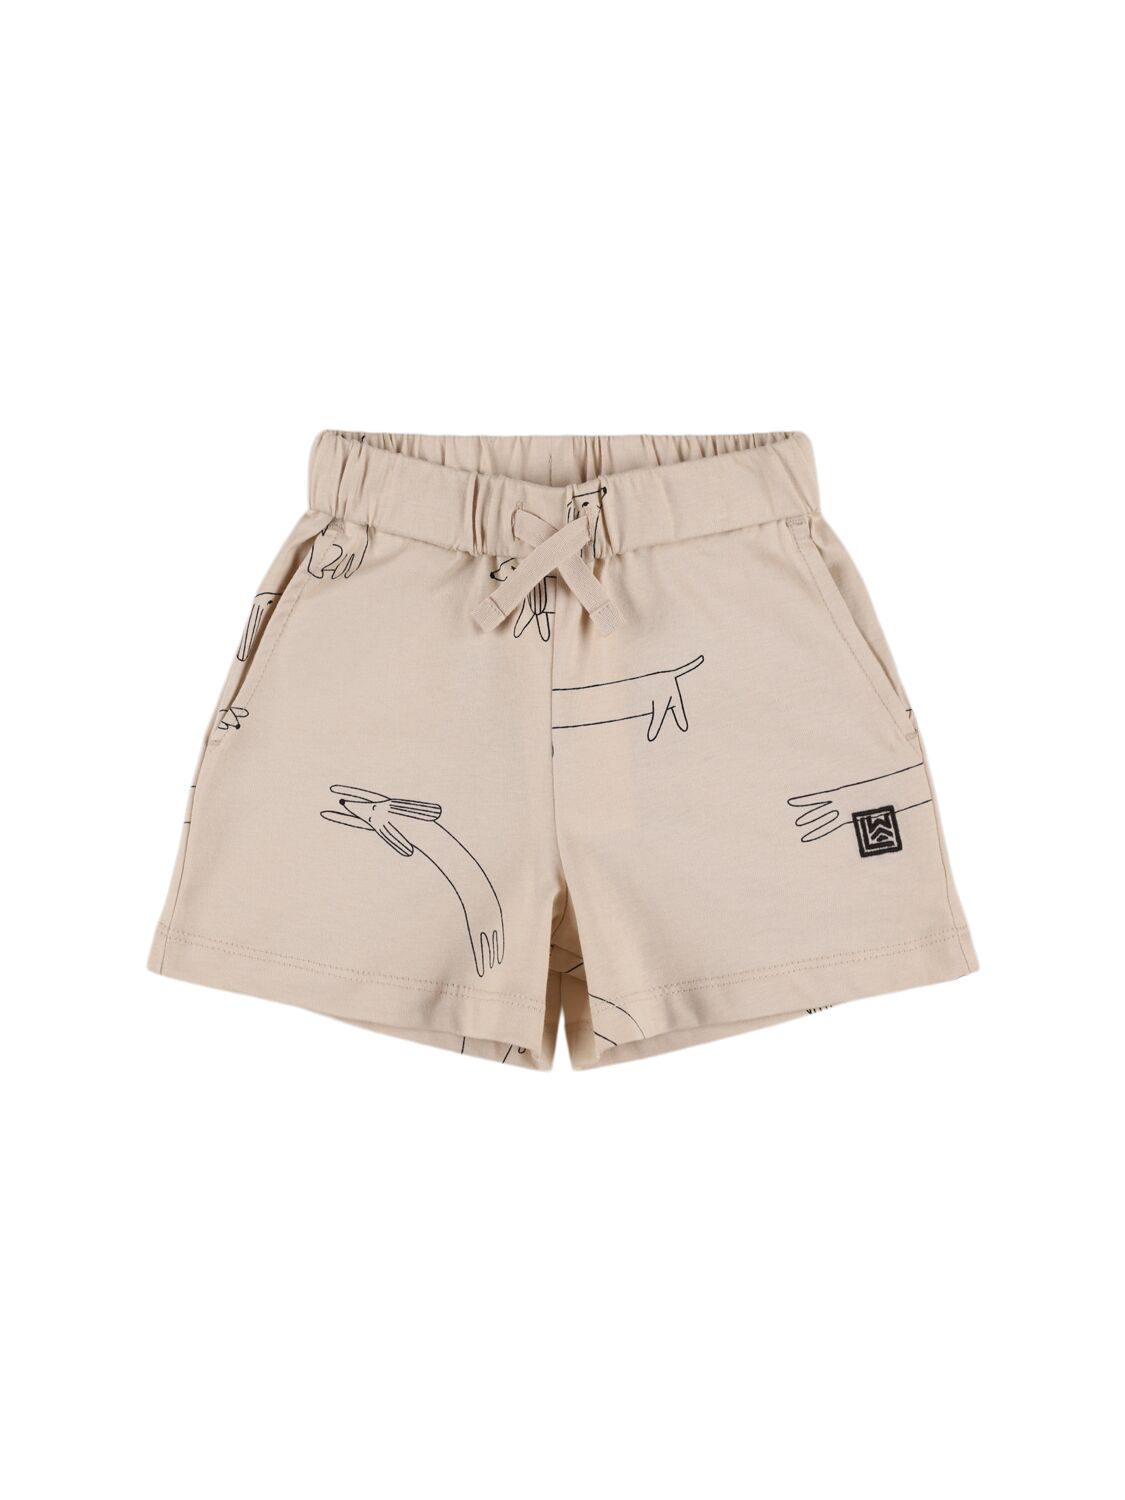 Liewood Kids' Printed Organic Cotton Shorts In Off White